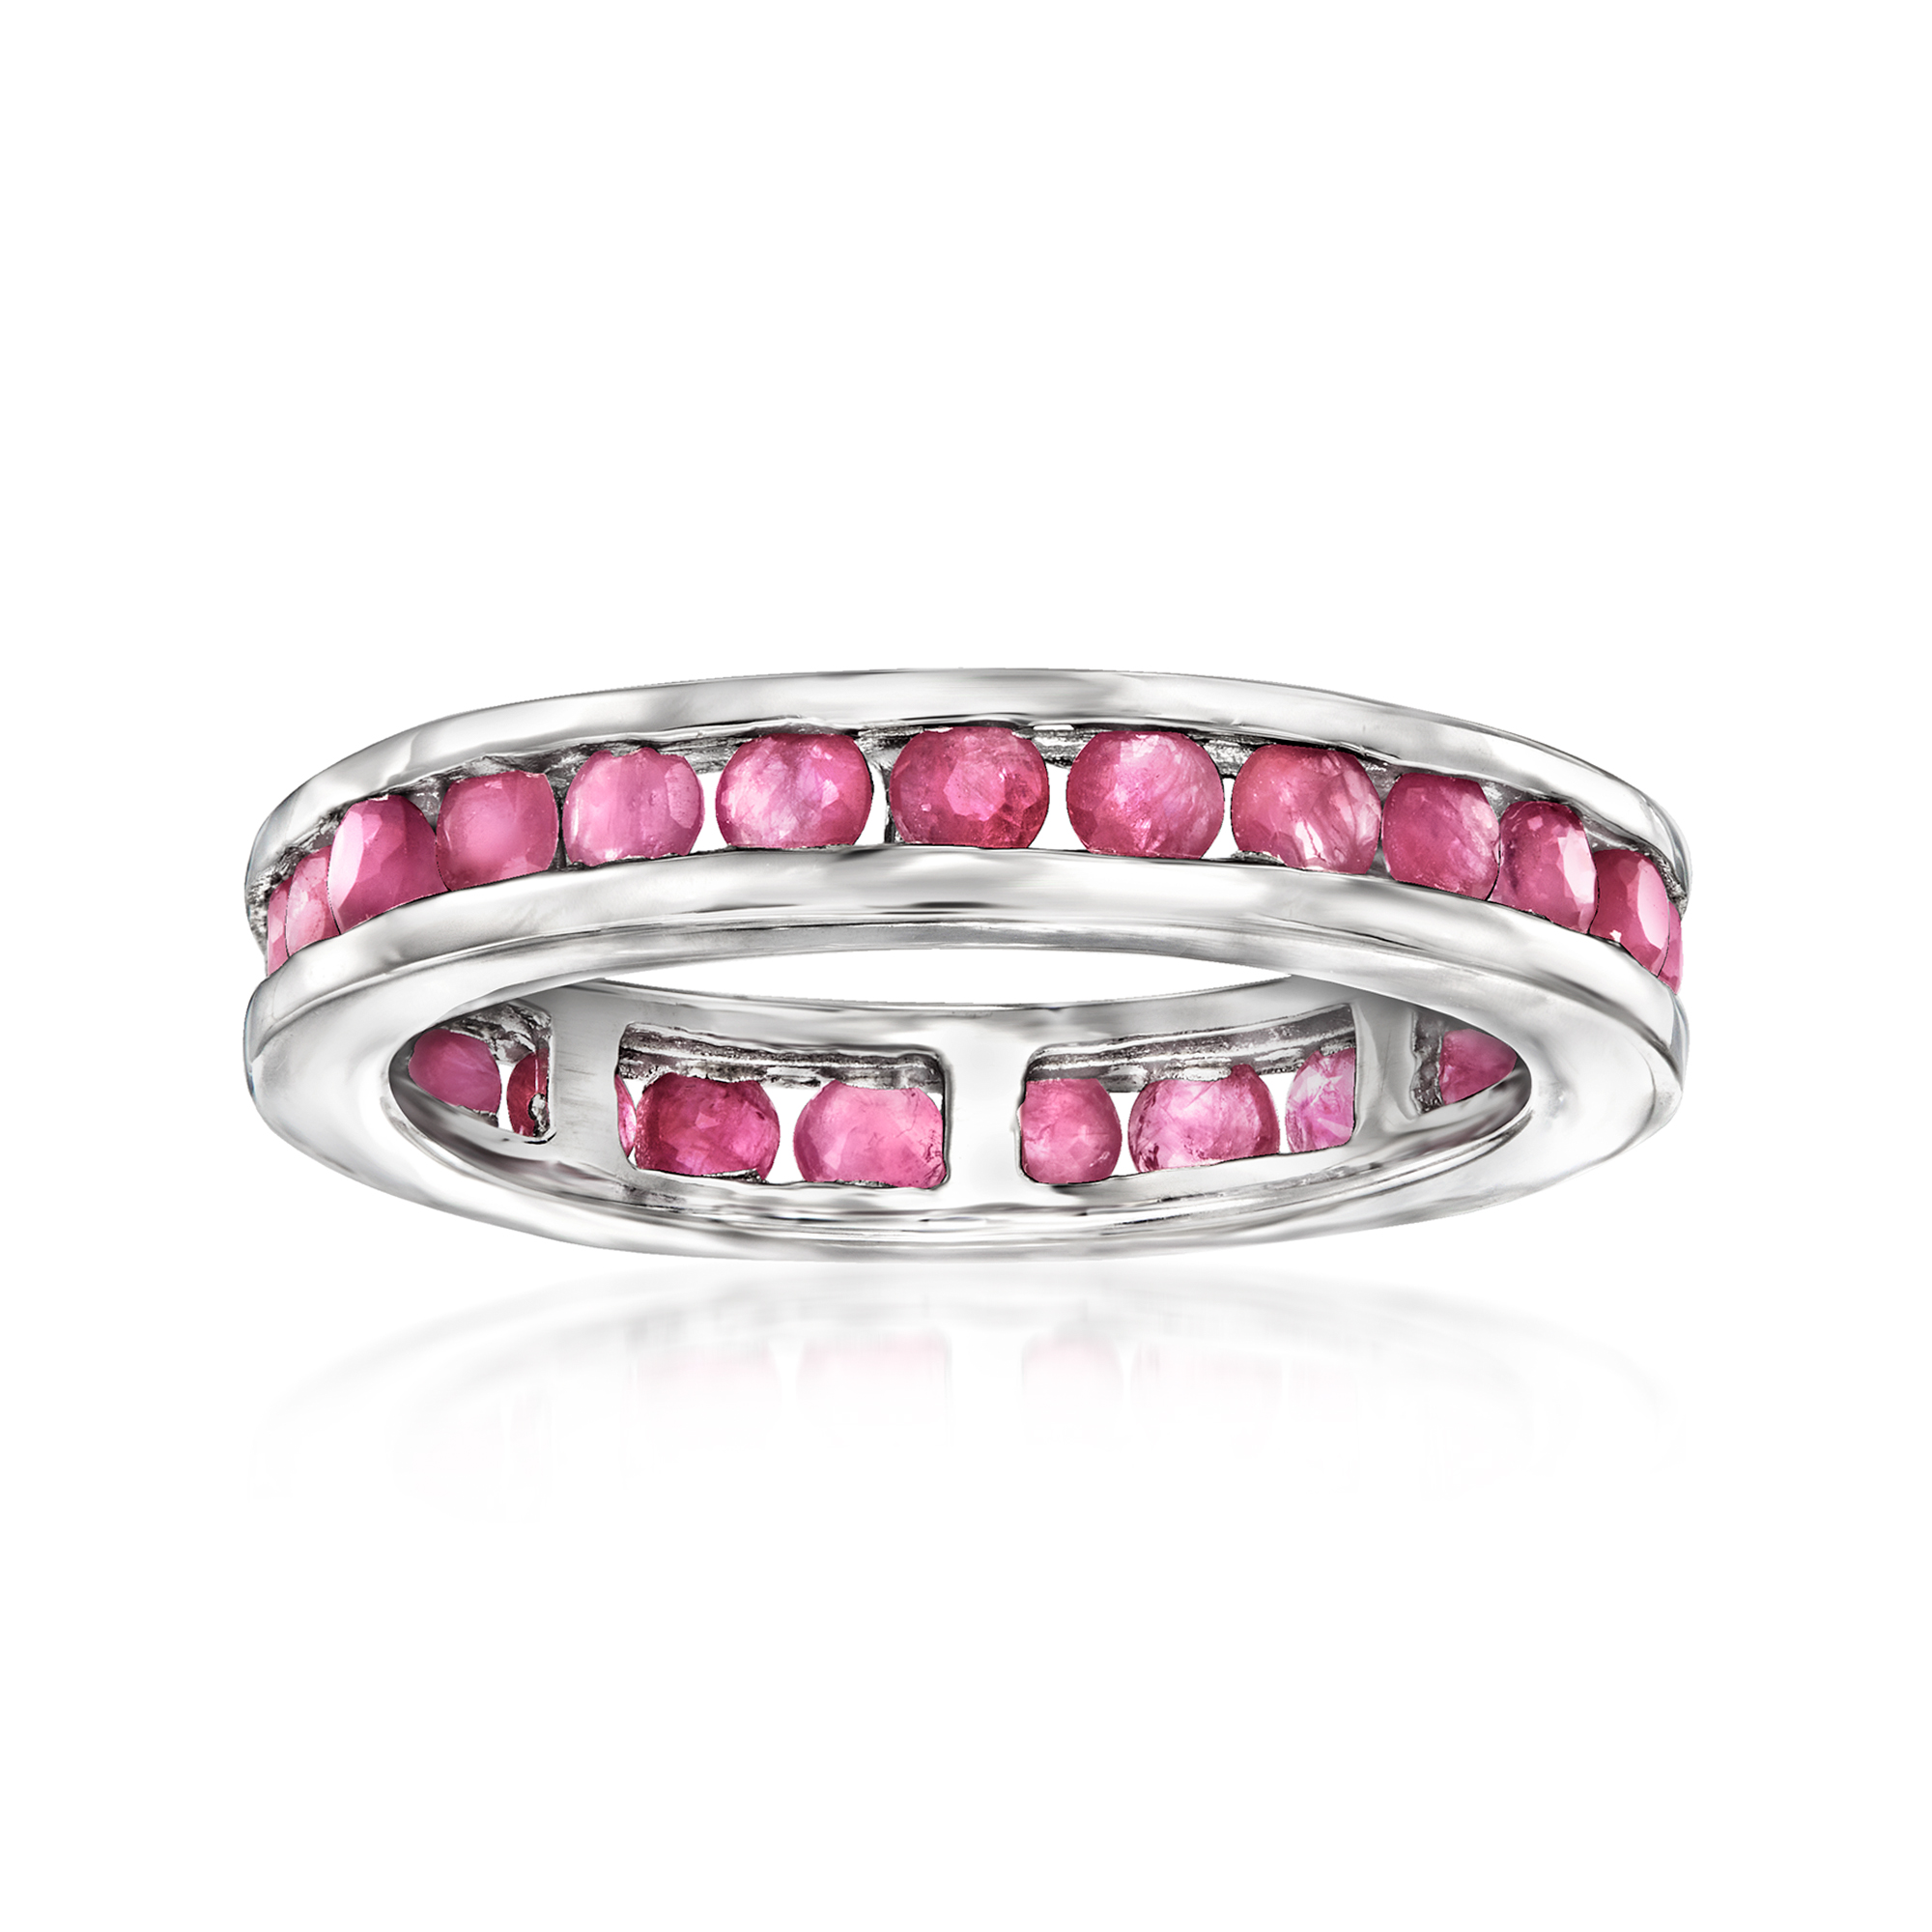 Simulated Ruby Eternity Wedding Band Ring Platinum Over